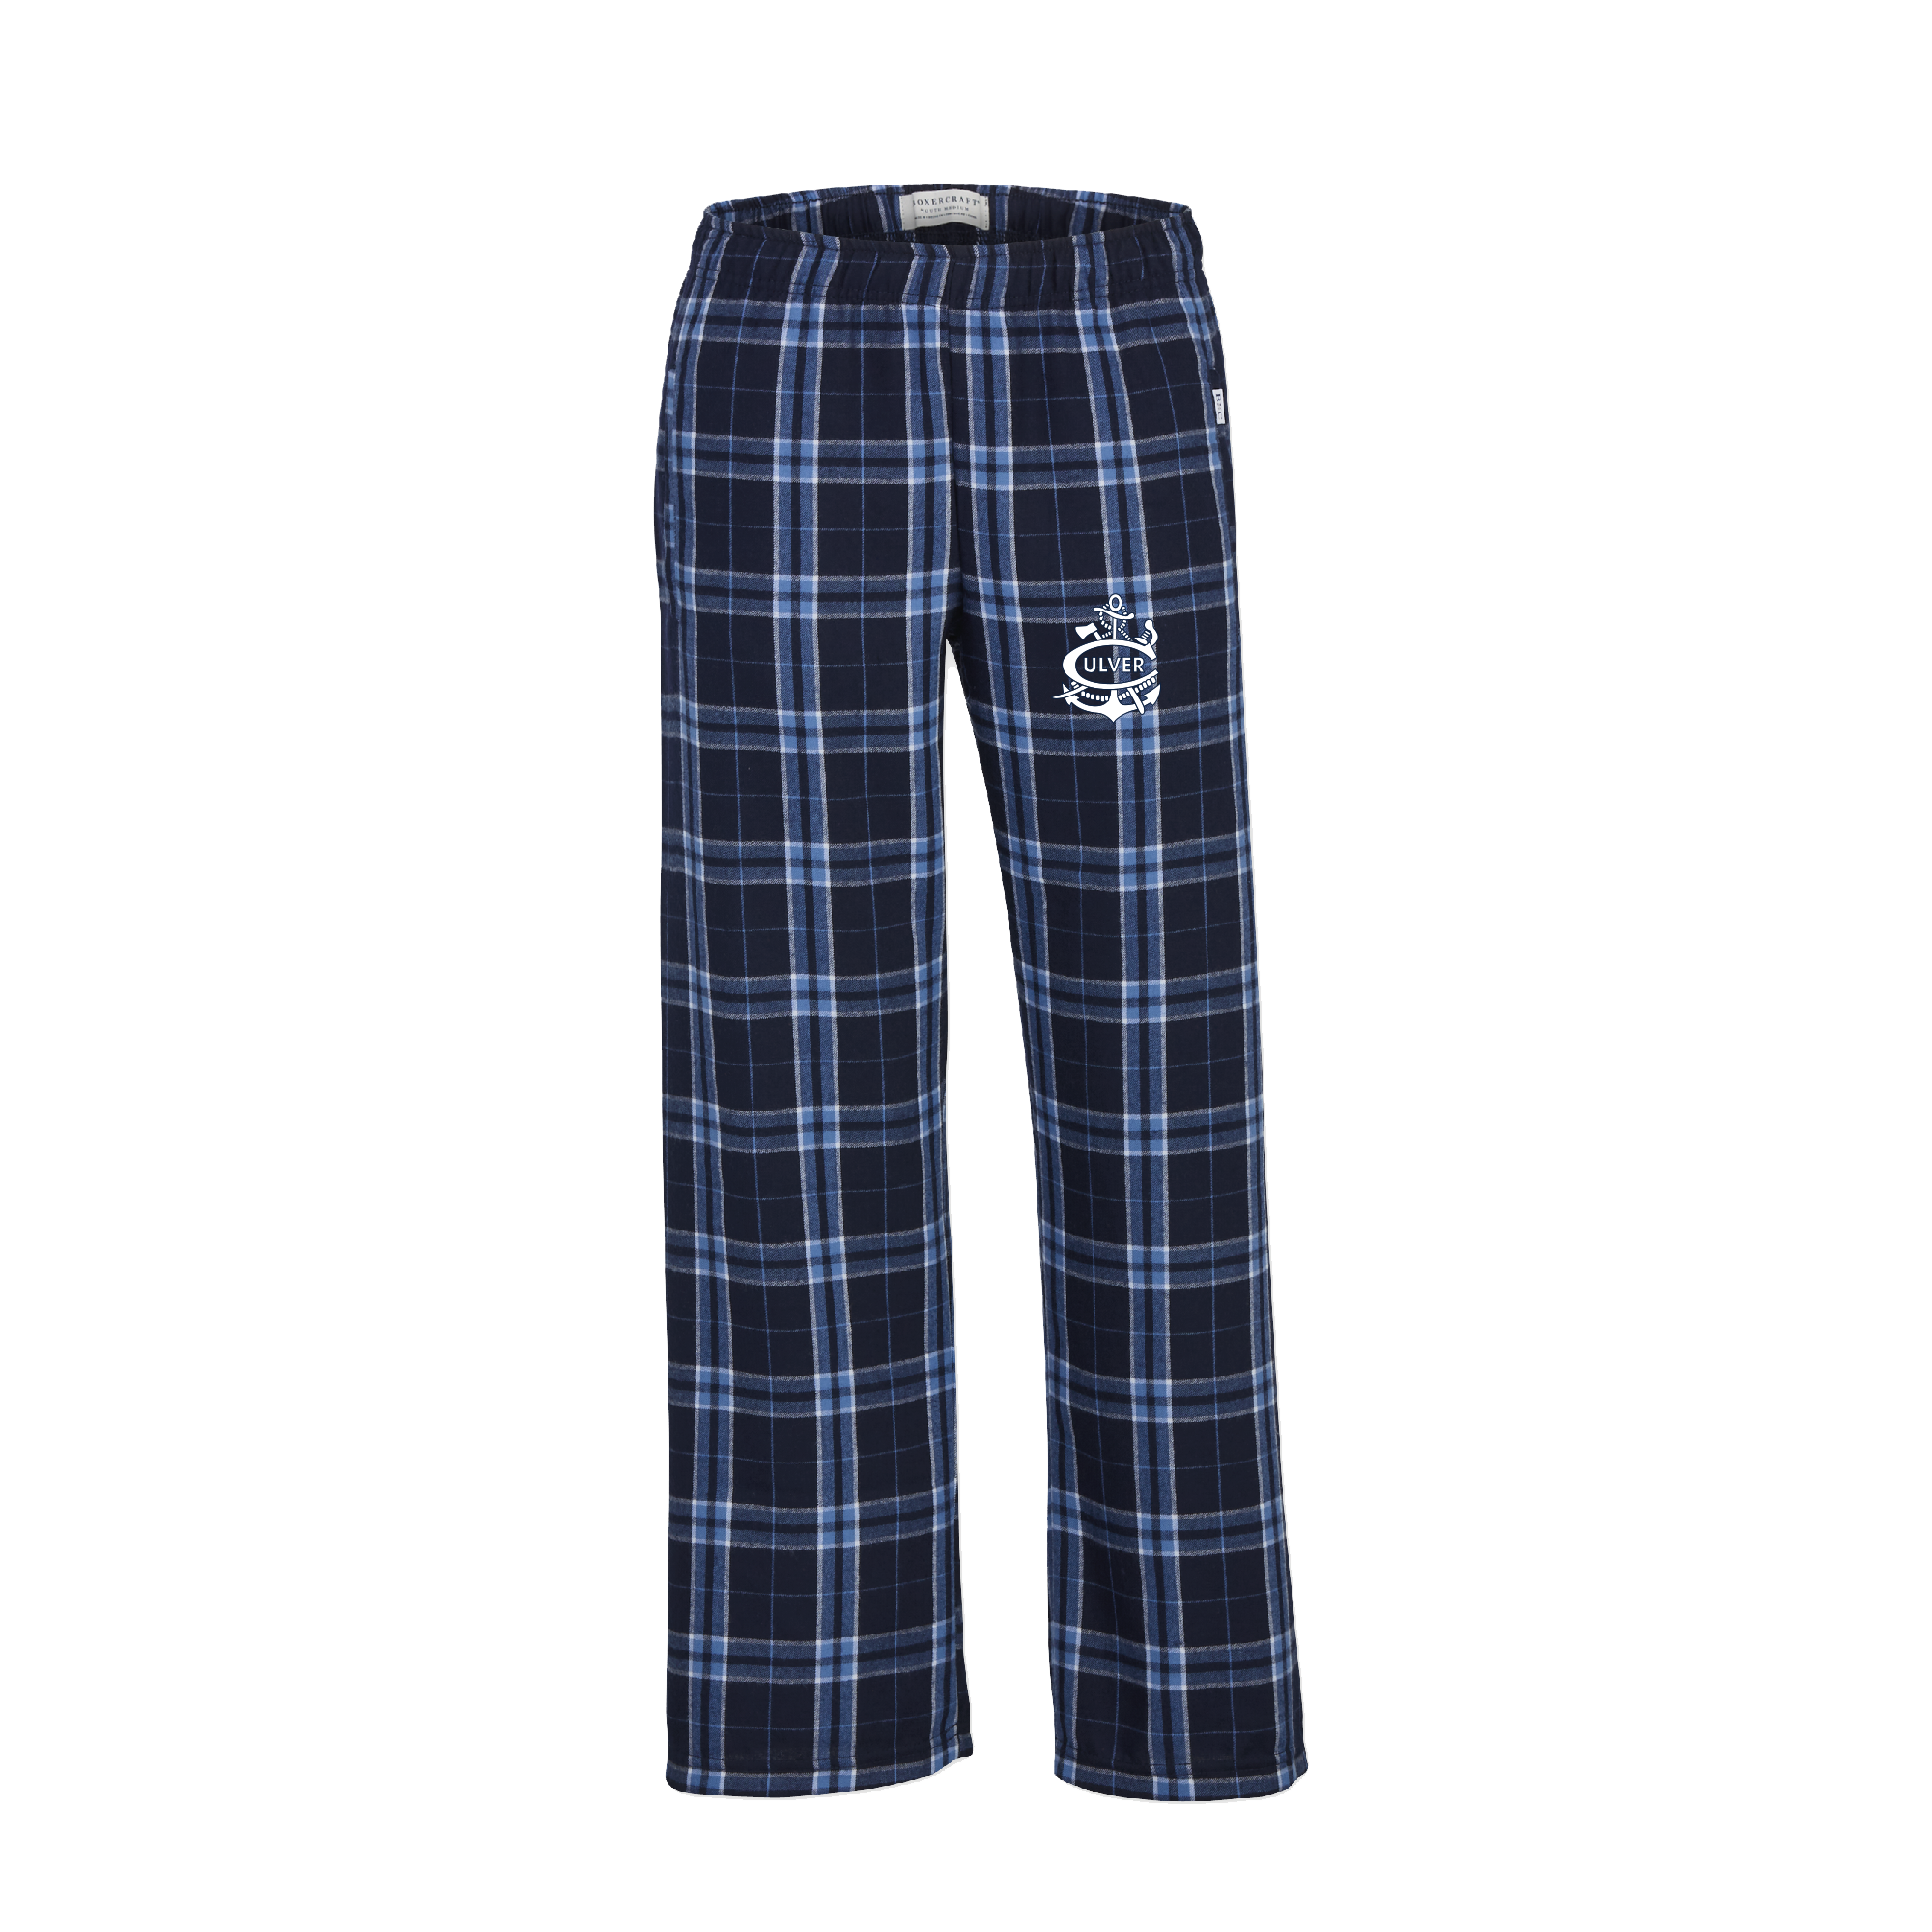 Youth Culver-Anchor Flannel Pant - Navy Plaid